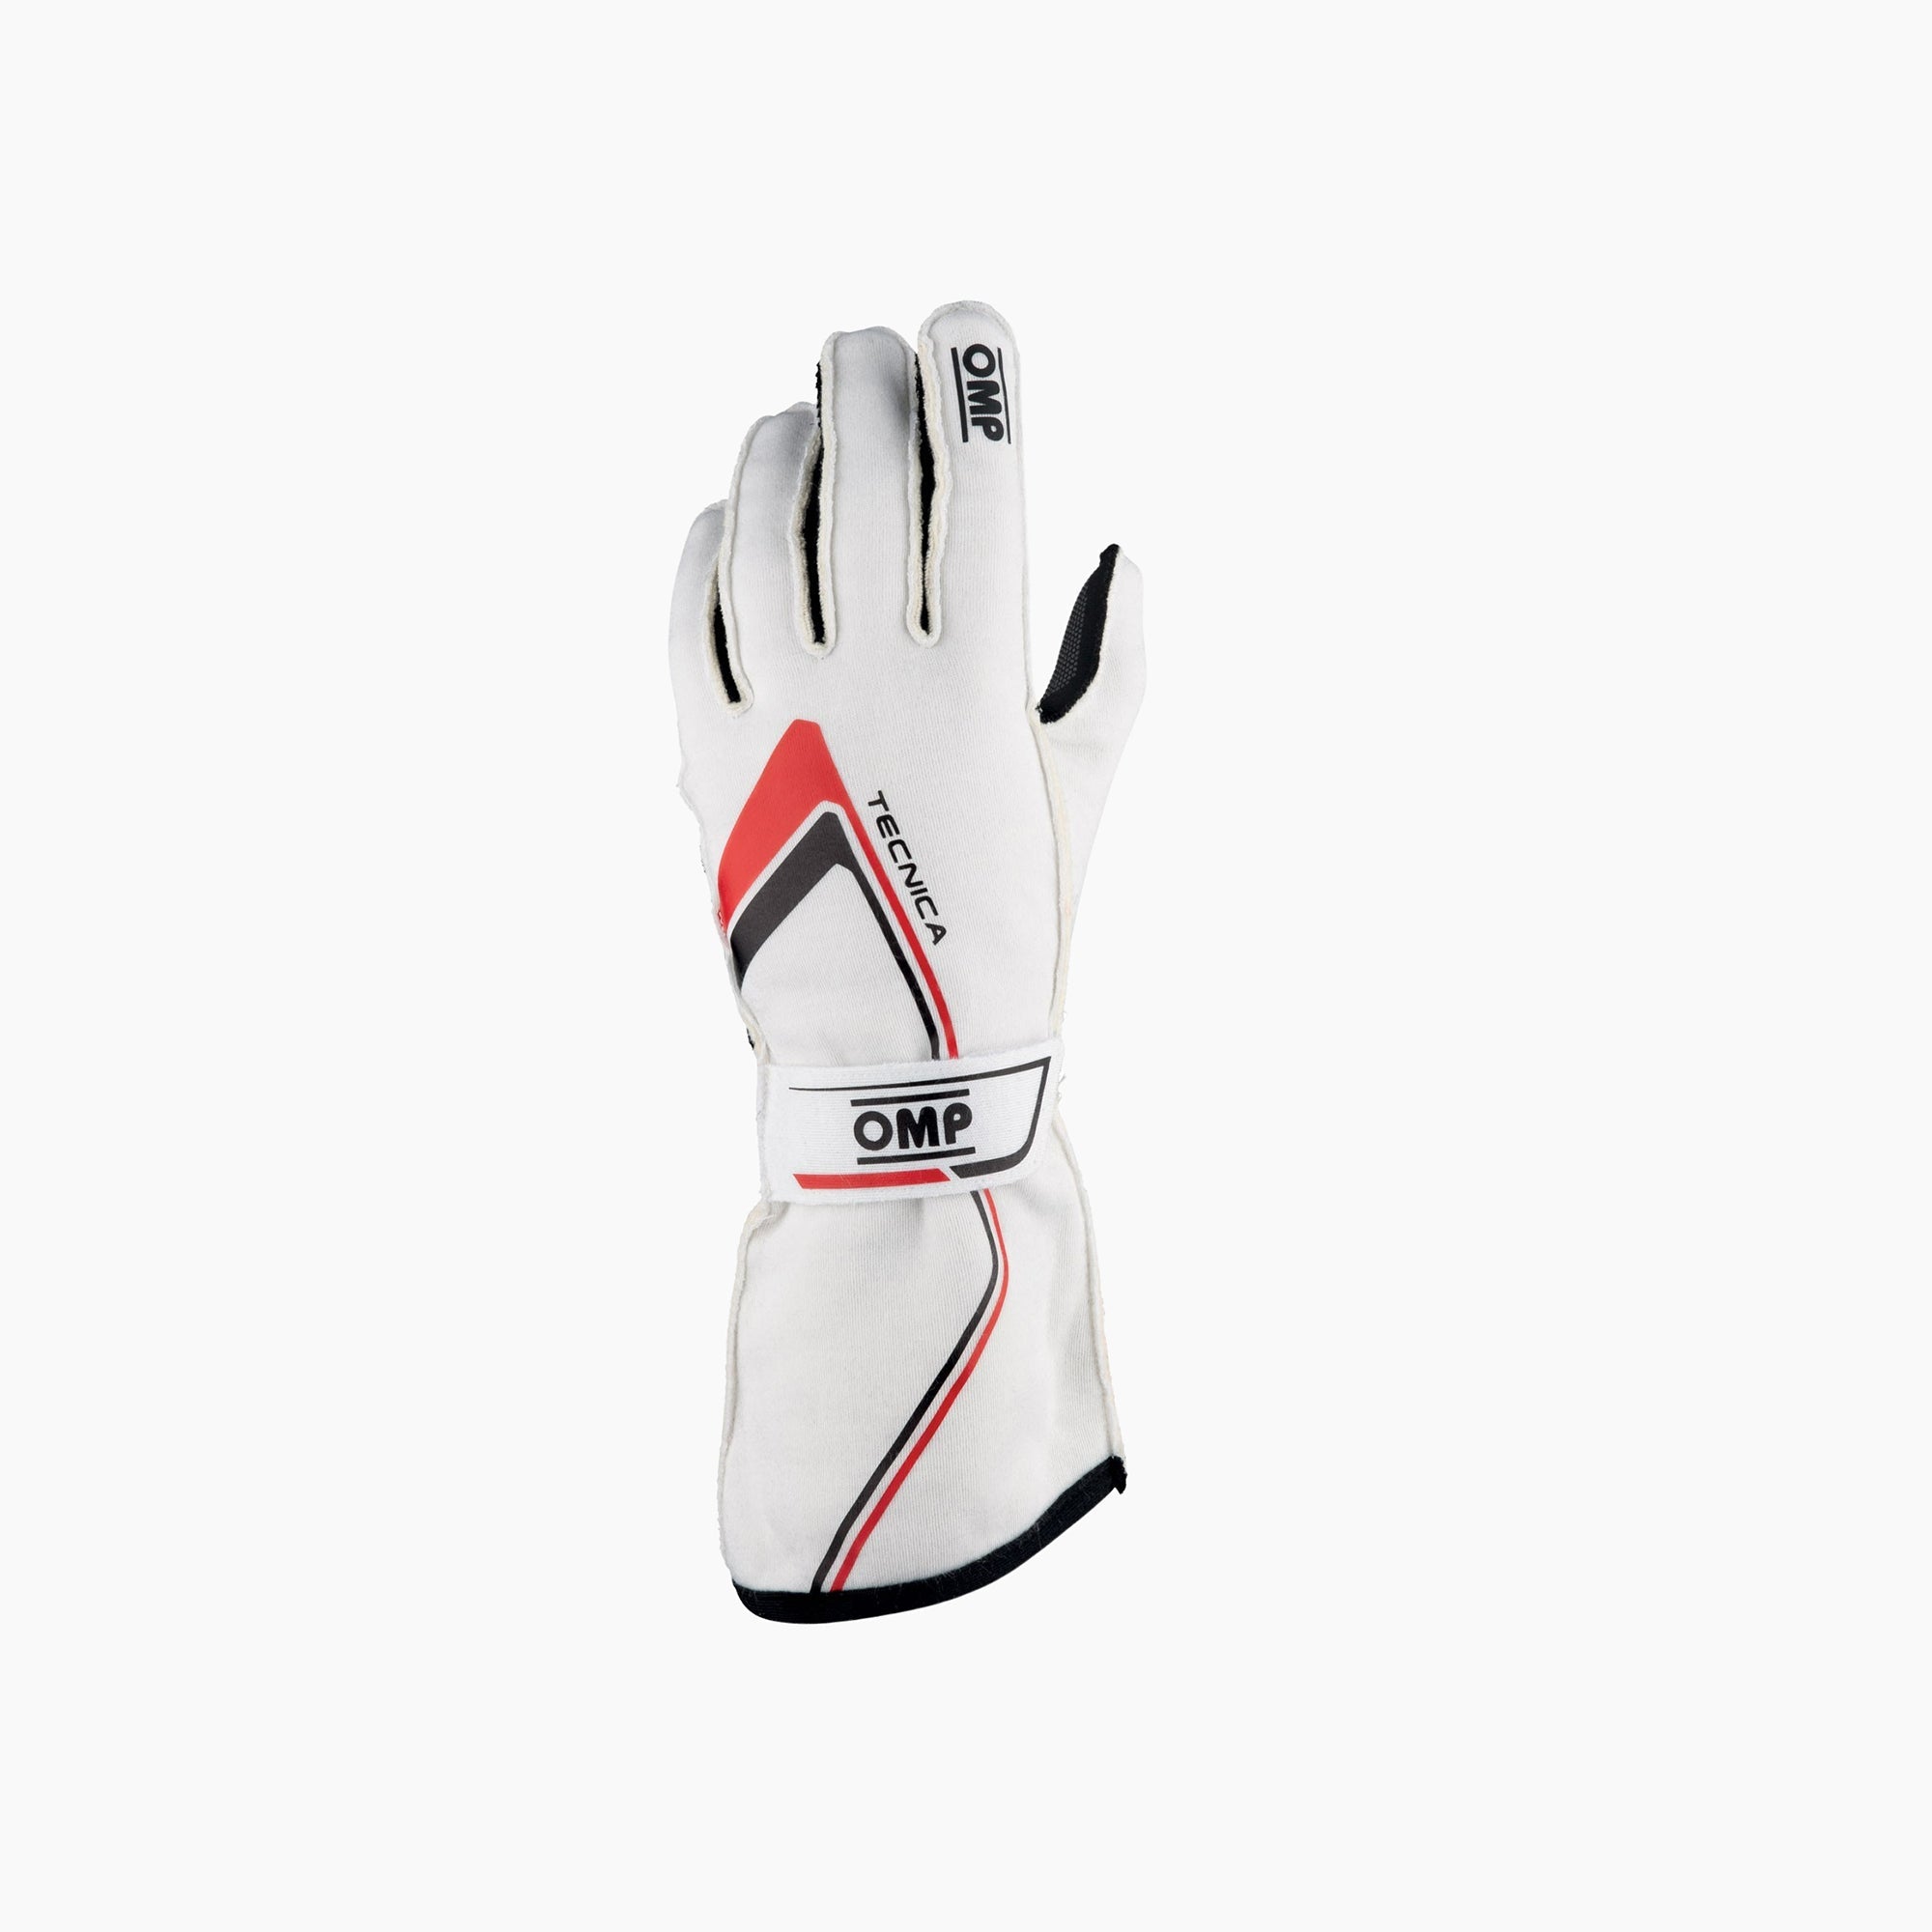 OMP | Tecnica Racing Gloves-Racing Gloves-OMP-gpx-store